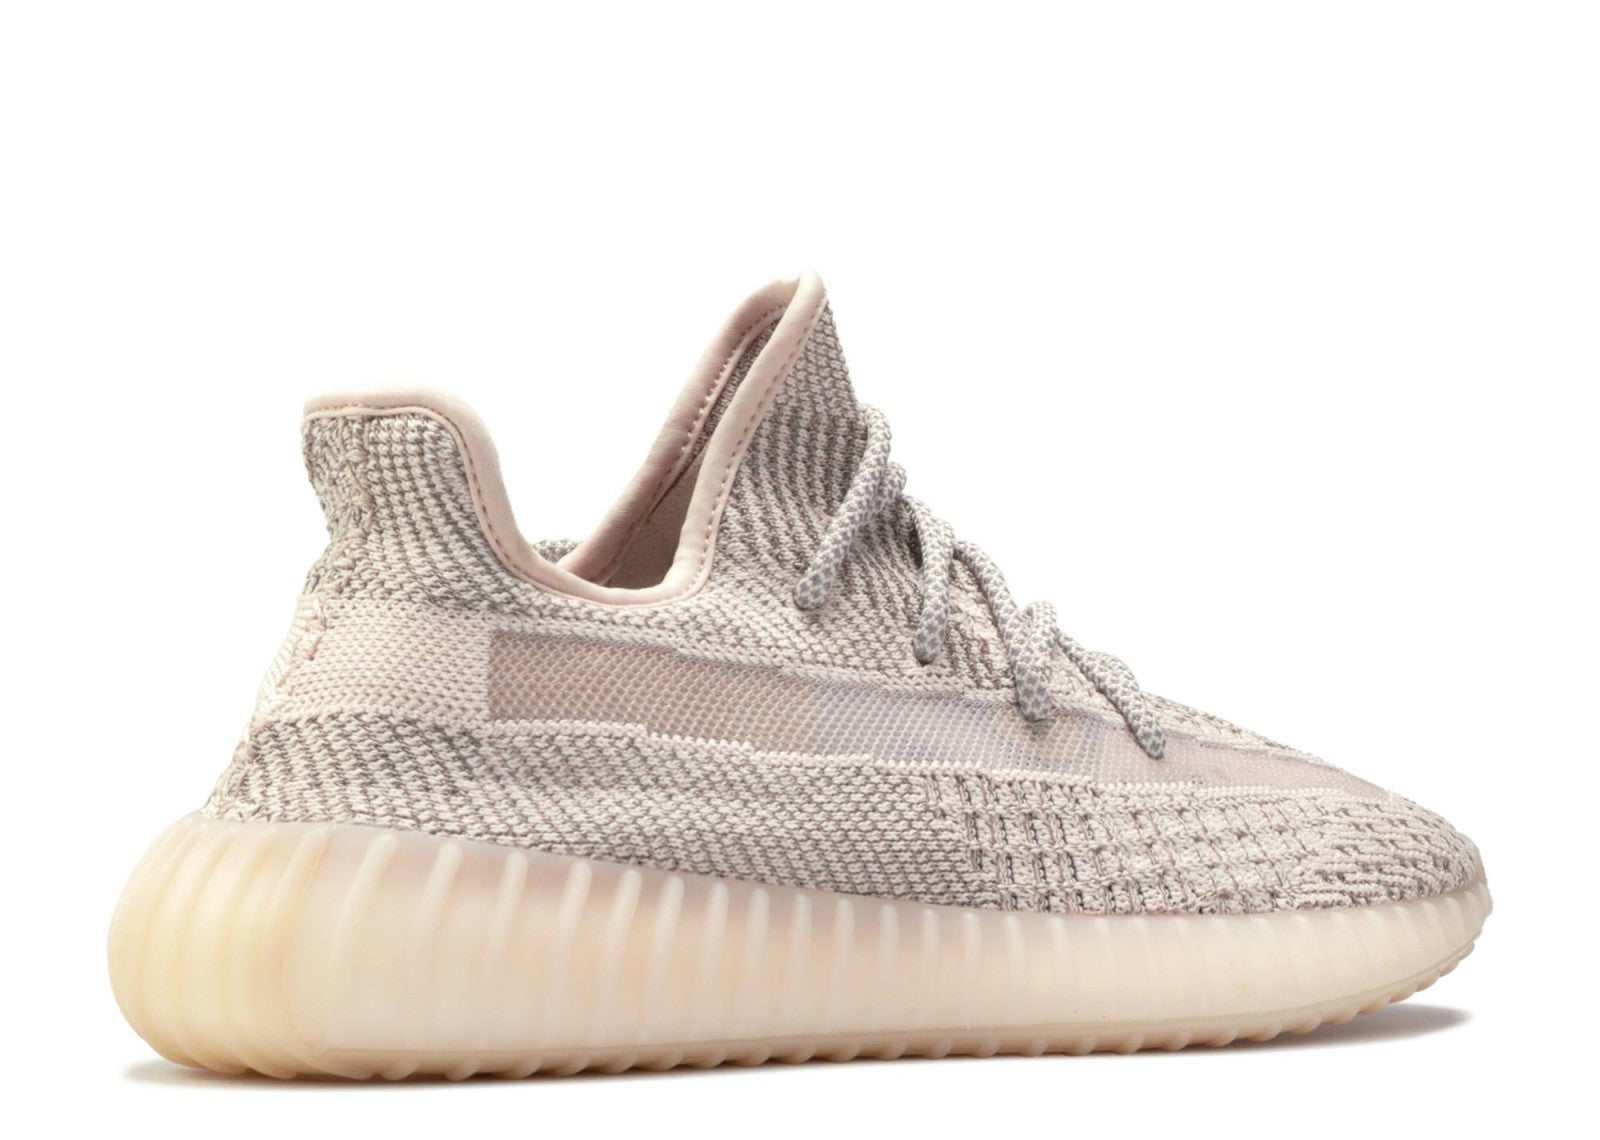 Yeezy Boost 350 V2 "Synth Reflective"